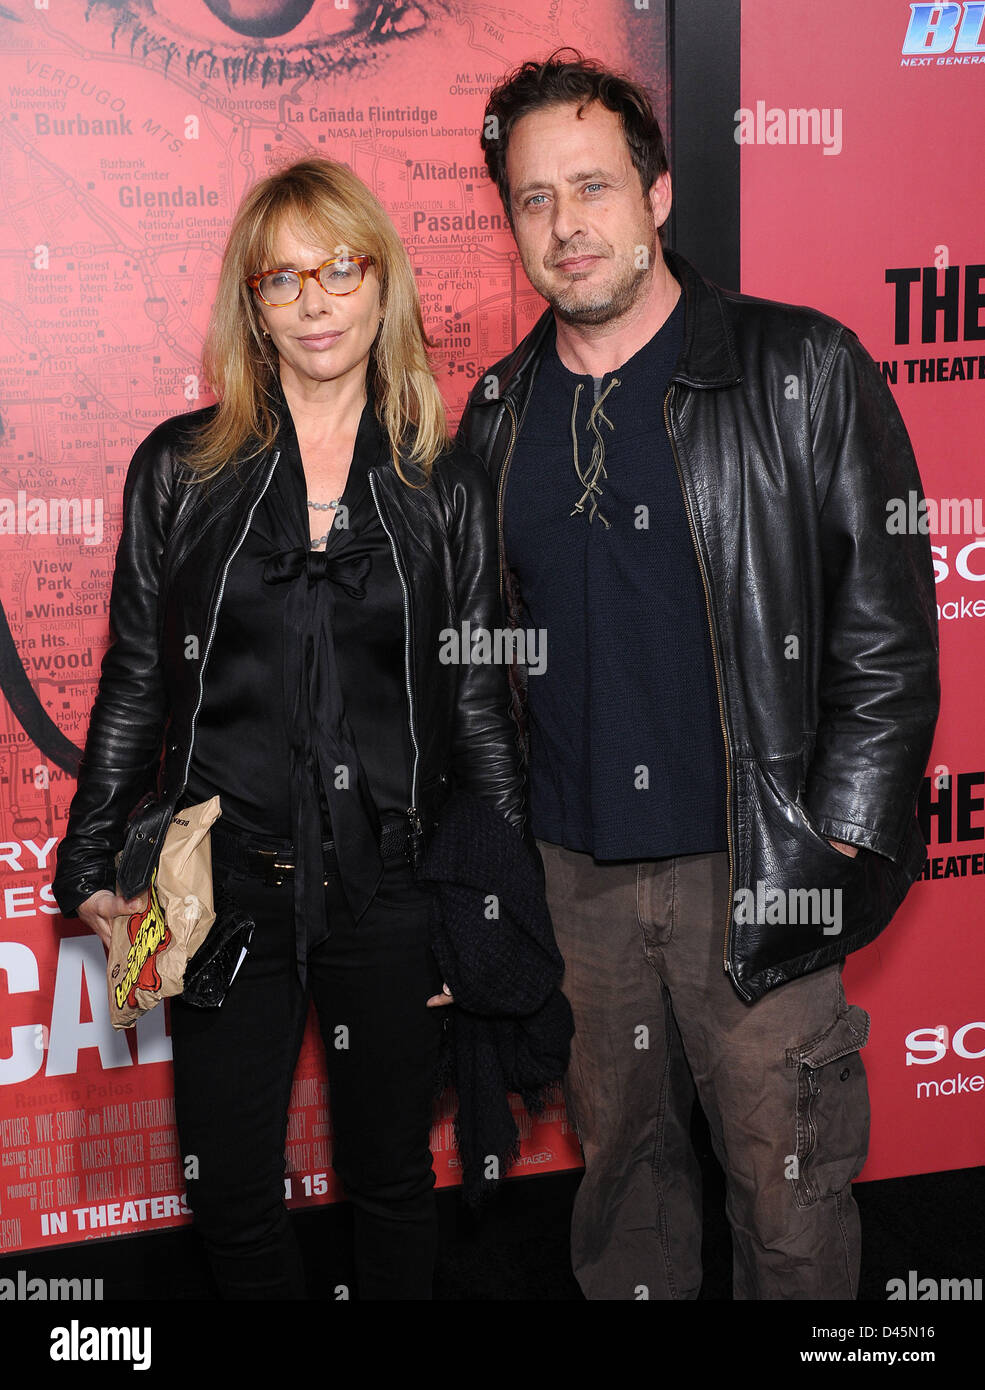 March 5, 2013 - Hollywood, California, U.S. - Rosanna Arquette & brother Richmond Arquette arrives for the premiere of the film 'The Call' at the ArcLight theater. (Credit Image: Credit:  Lisa O'Connor/ZUMAPRESS.com/Alamy Live News) Stock Photo